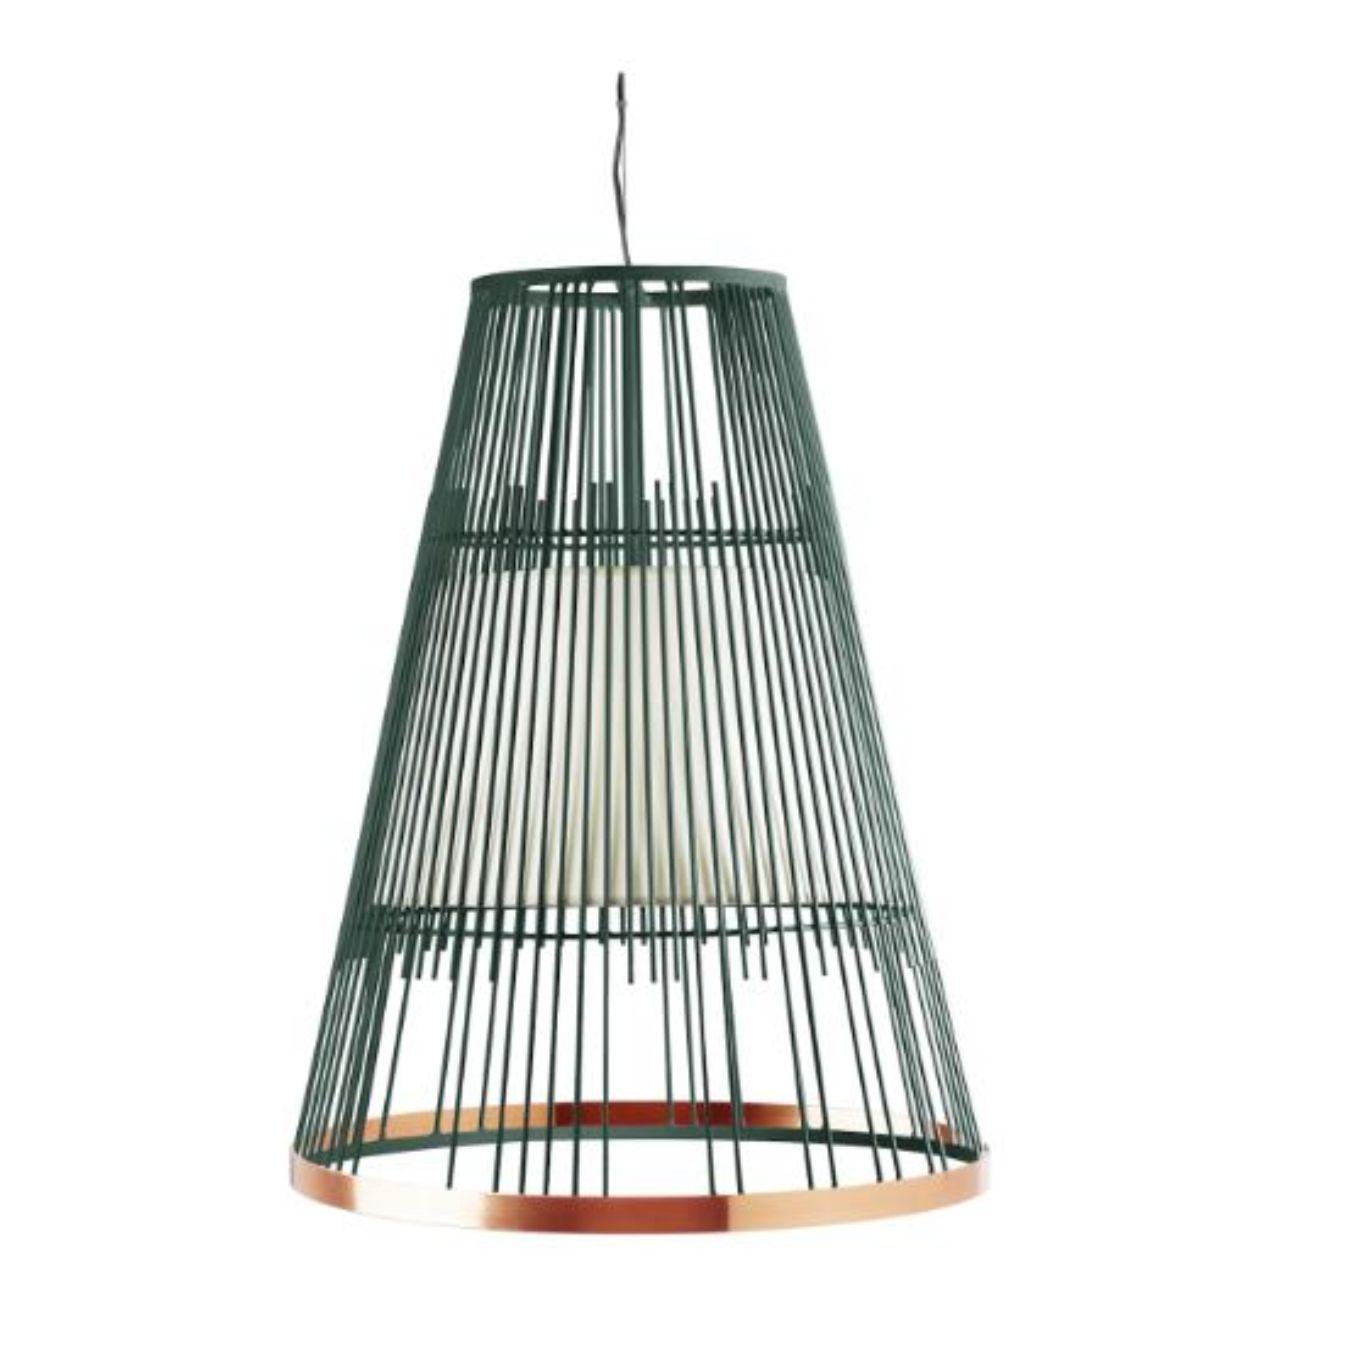 Moss up suspension lamp with copper ring by Dooq.
Dimensions: W 55 x D 55 x H 72 cm
Materials: lacquered metal, polished or brushed metal, copper.
abat-jour: cotton
Also available in different colors and materials.

Information:
230V/50Hz
E27/1x20W